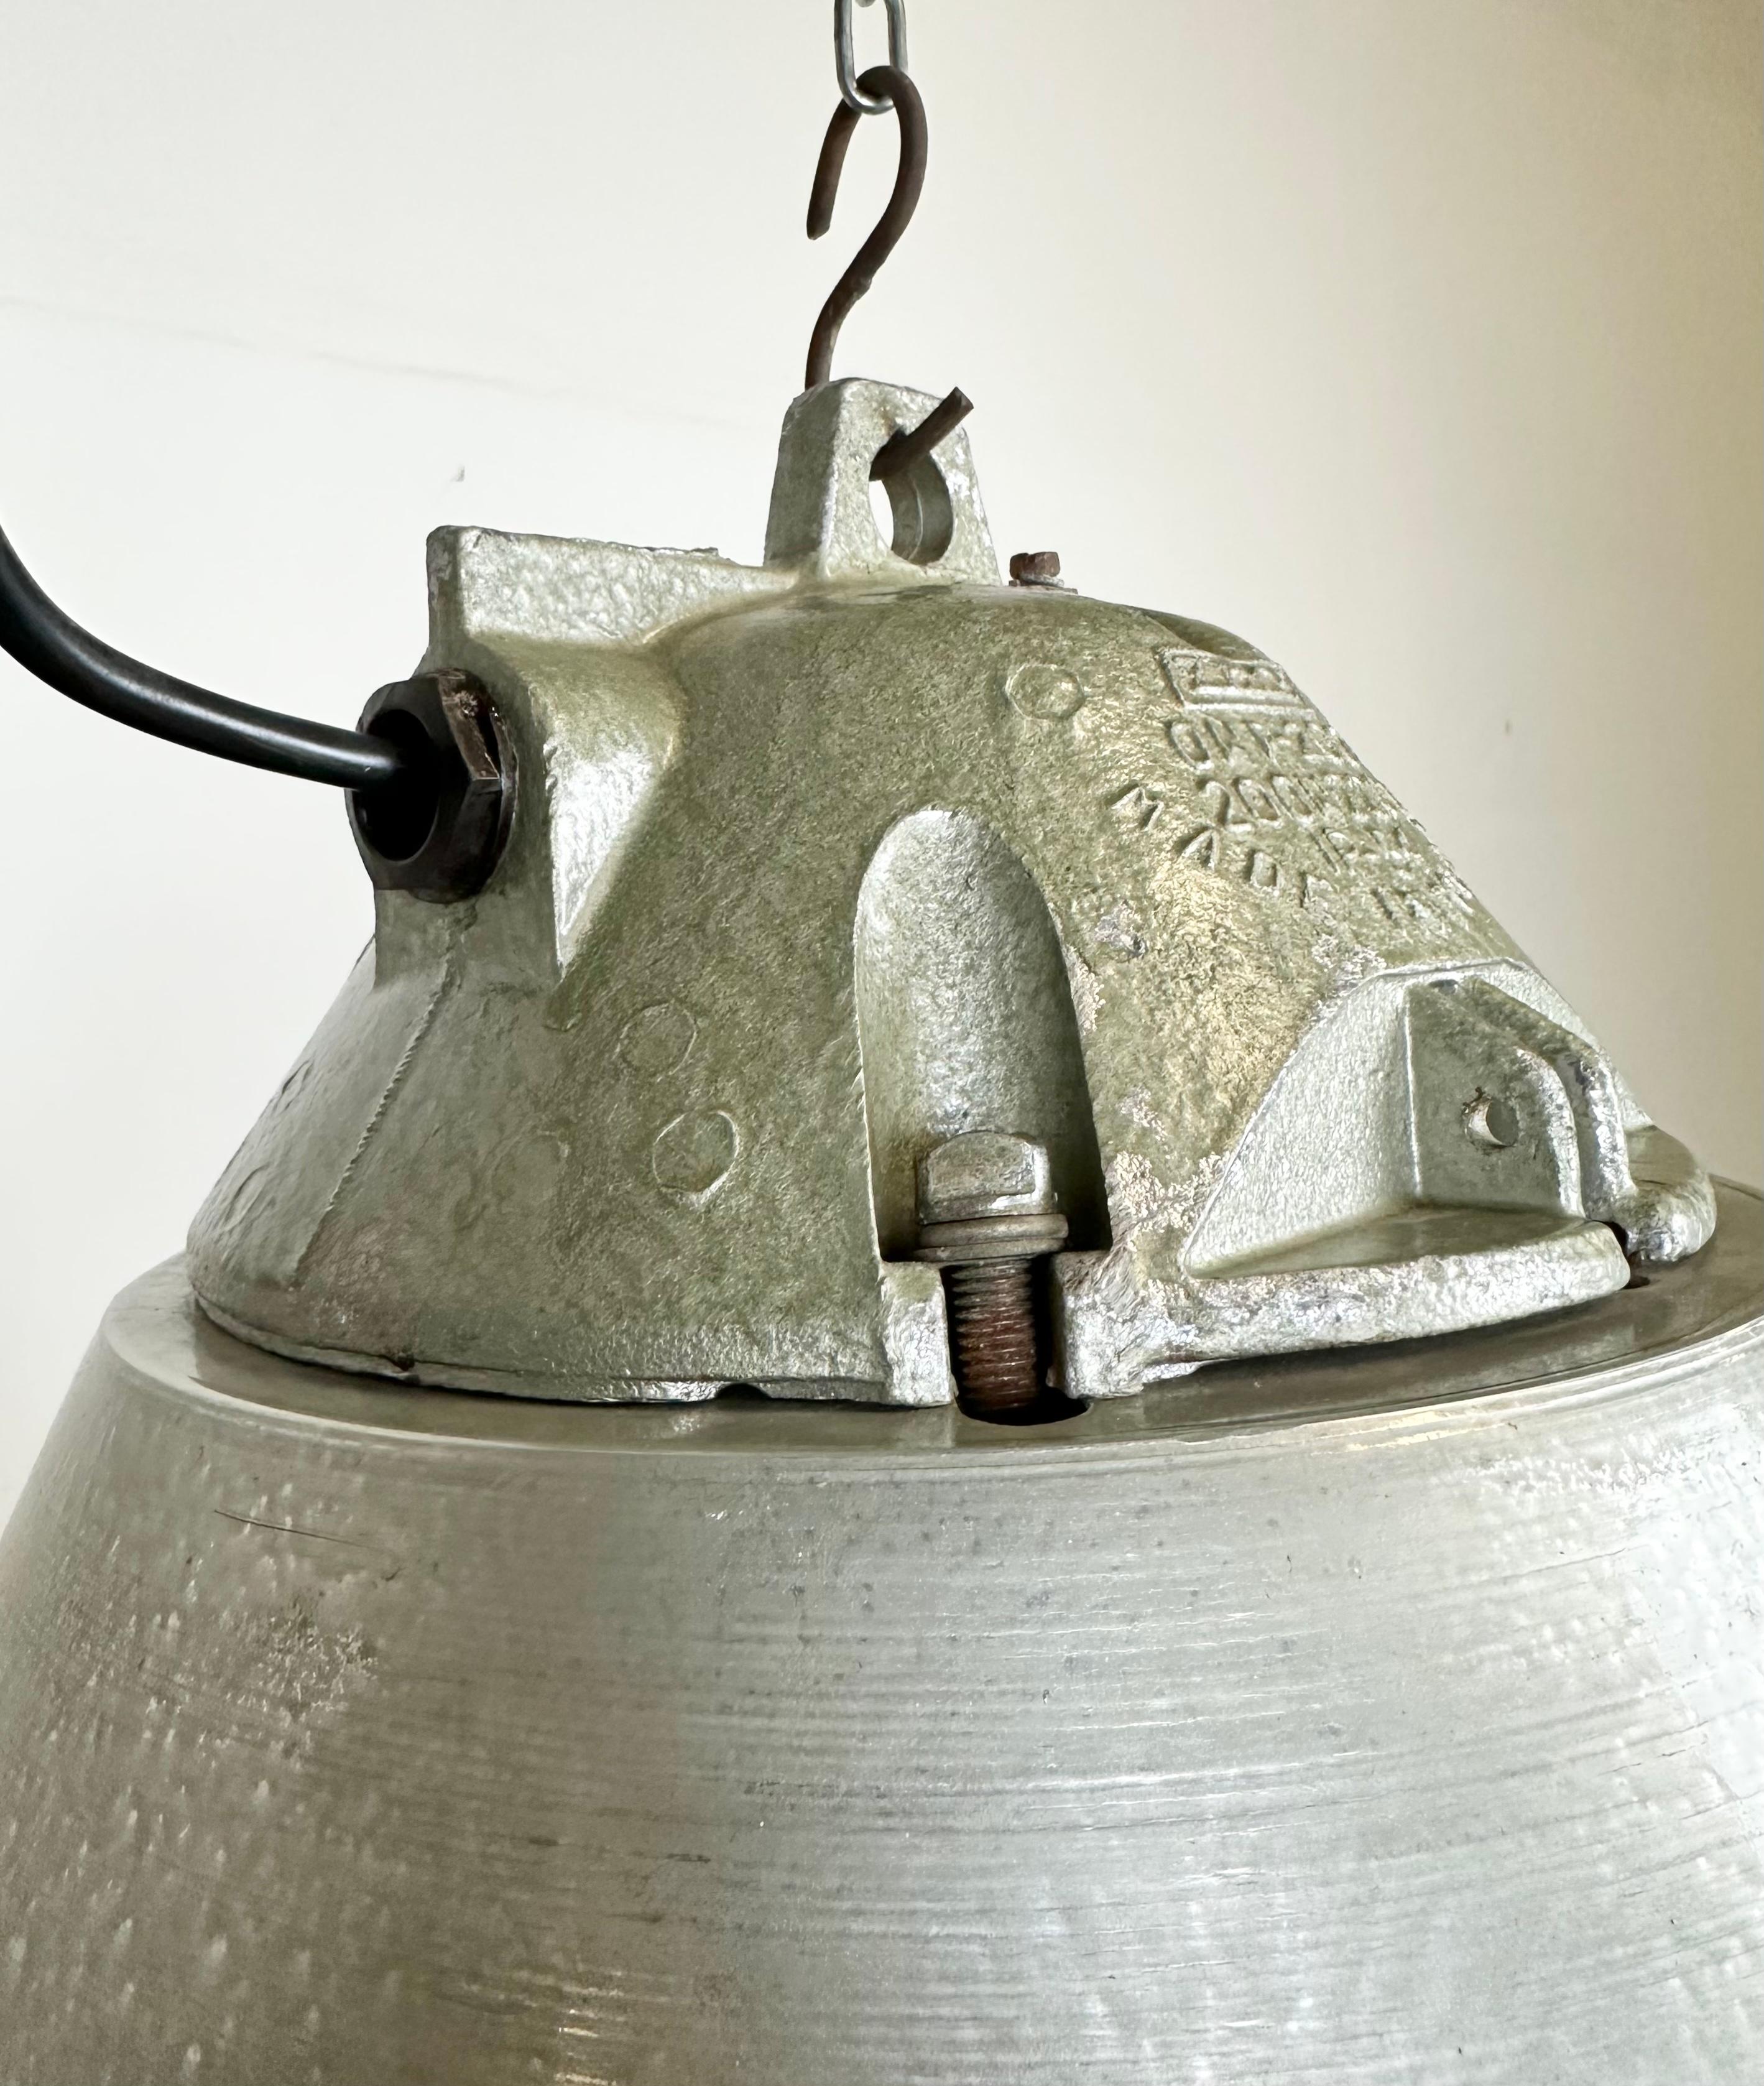 Grey Industrial Explosion Proof Lamp with Aluminum Shade from Zaos, 1970s For Sale 8